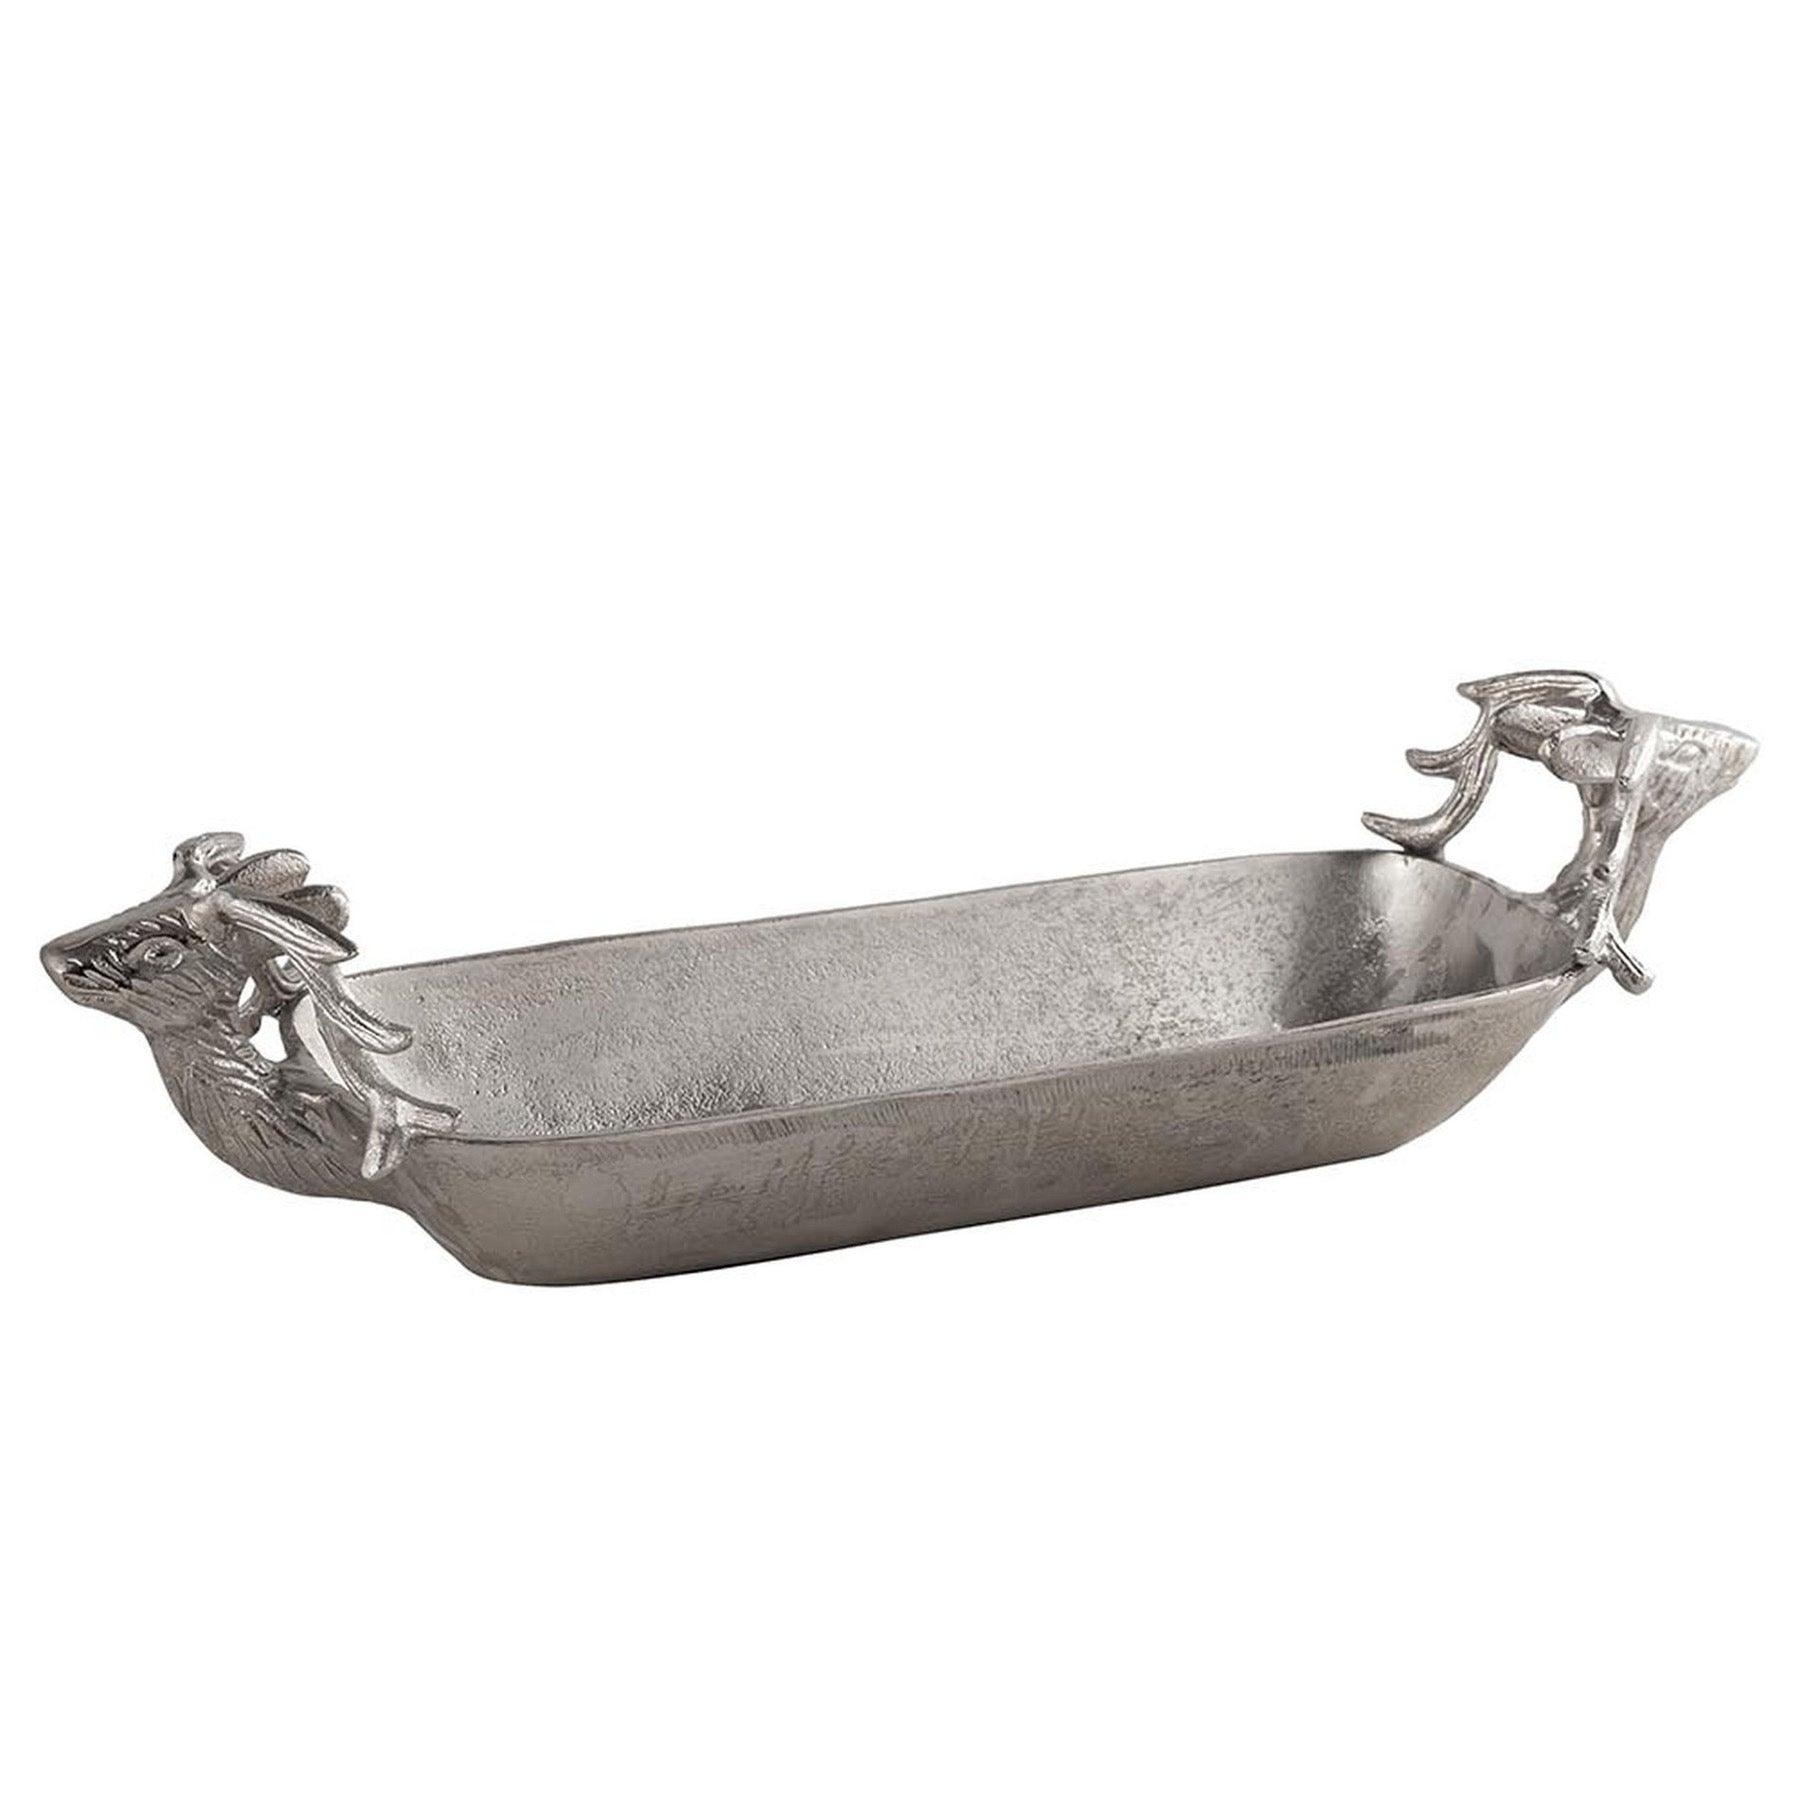 Farrah Collection Silver Deer Display Tray - Vookoo Lifestyle